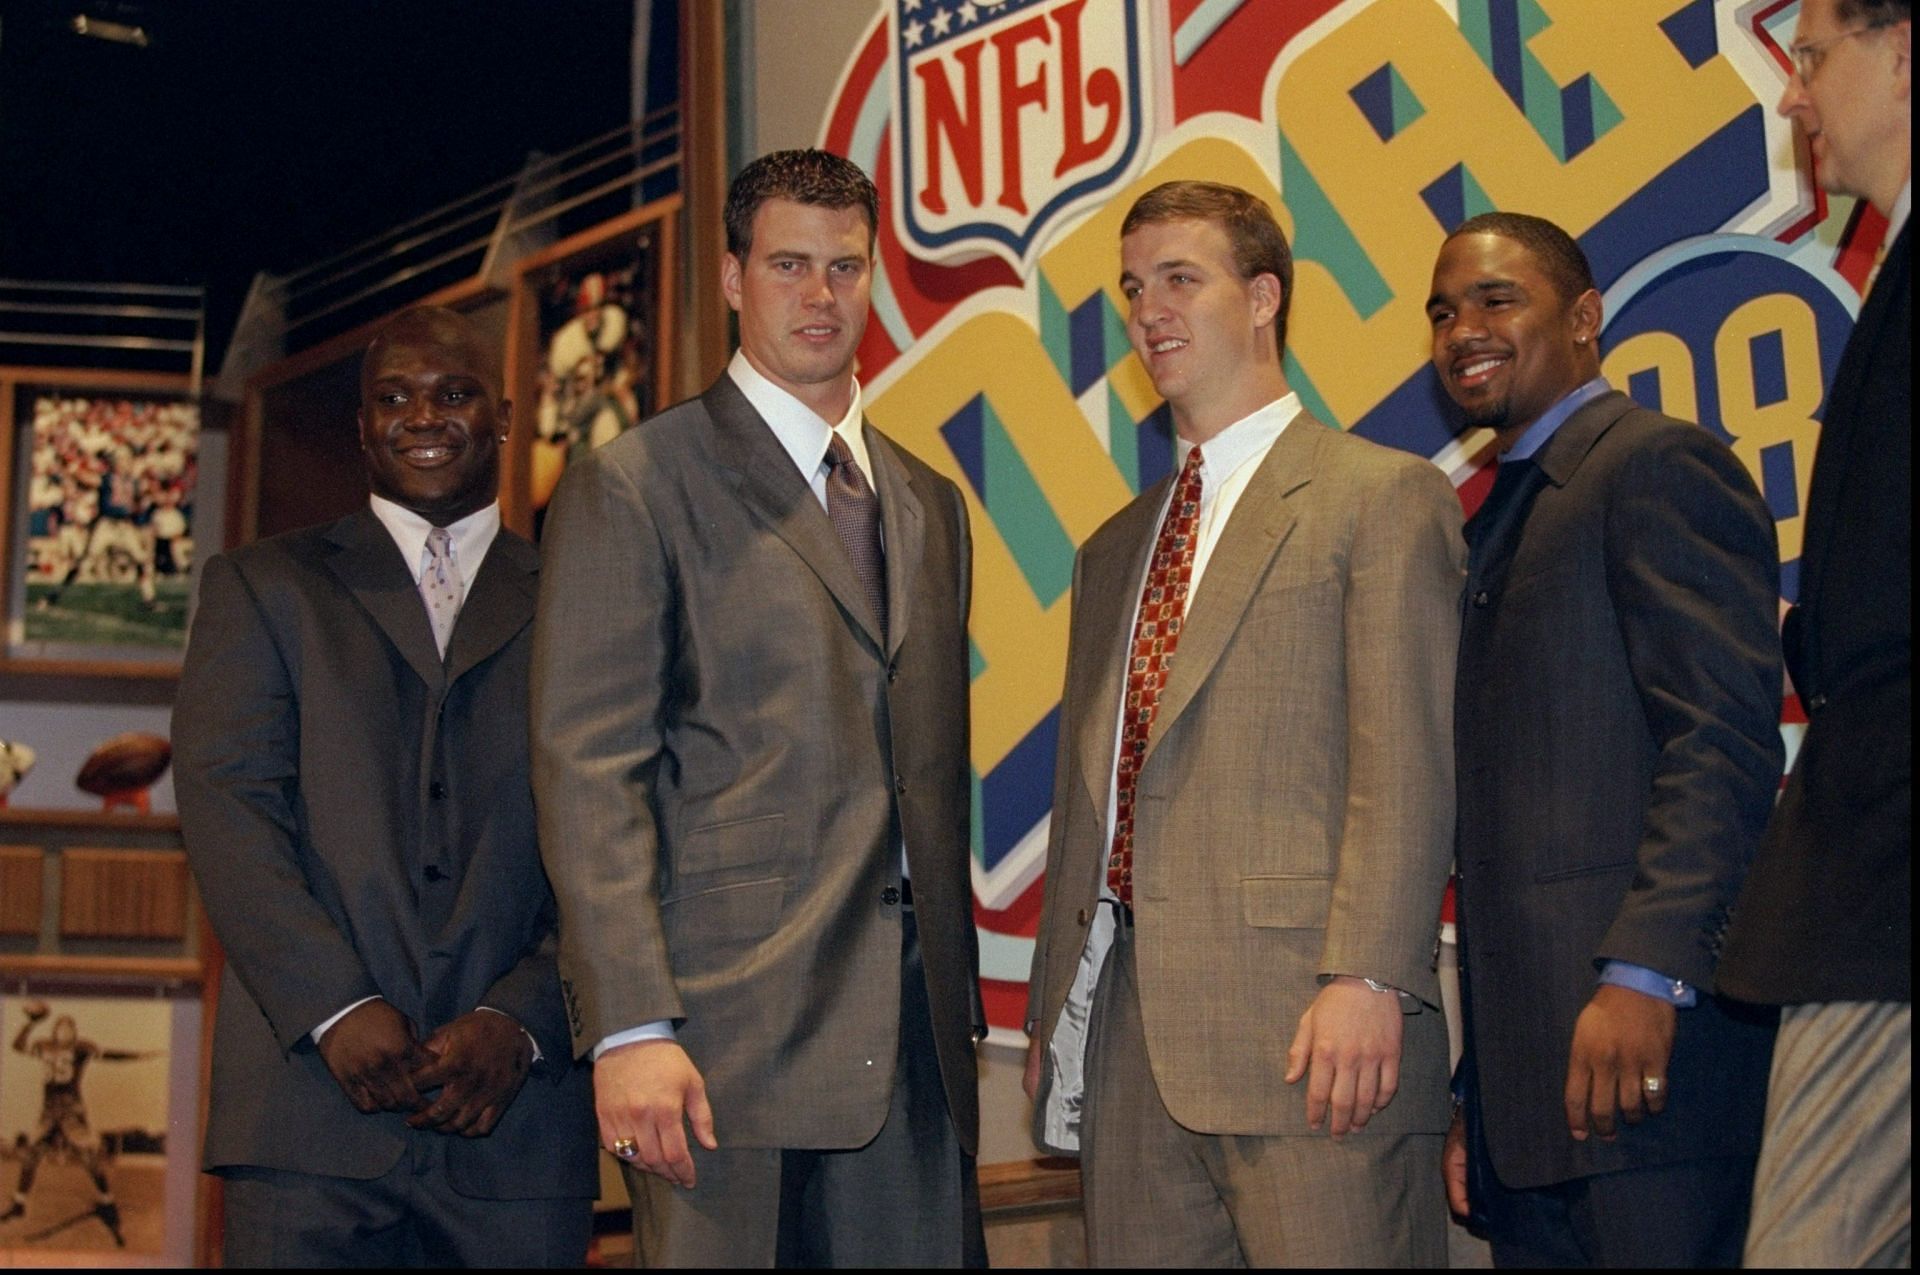 Peyton Manning and Ryan Leaf: The QBs, the myths, the legends of 1998 NFL  Draft - The Athletic